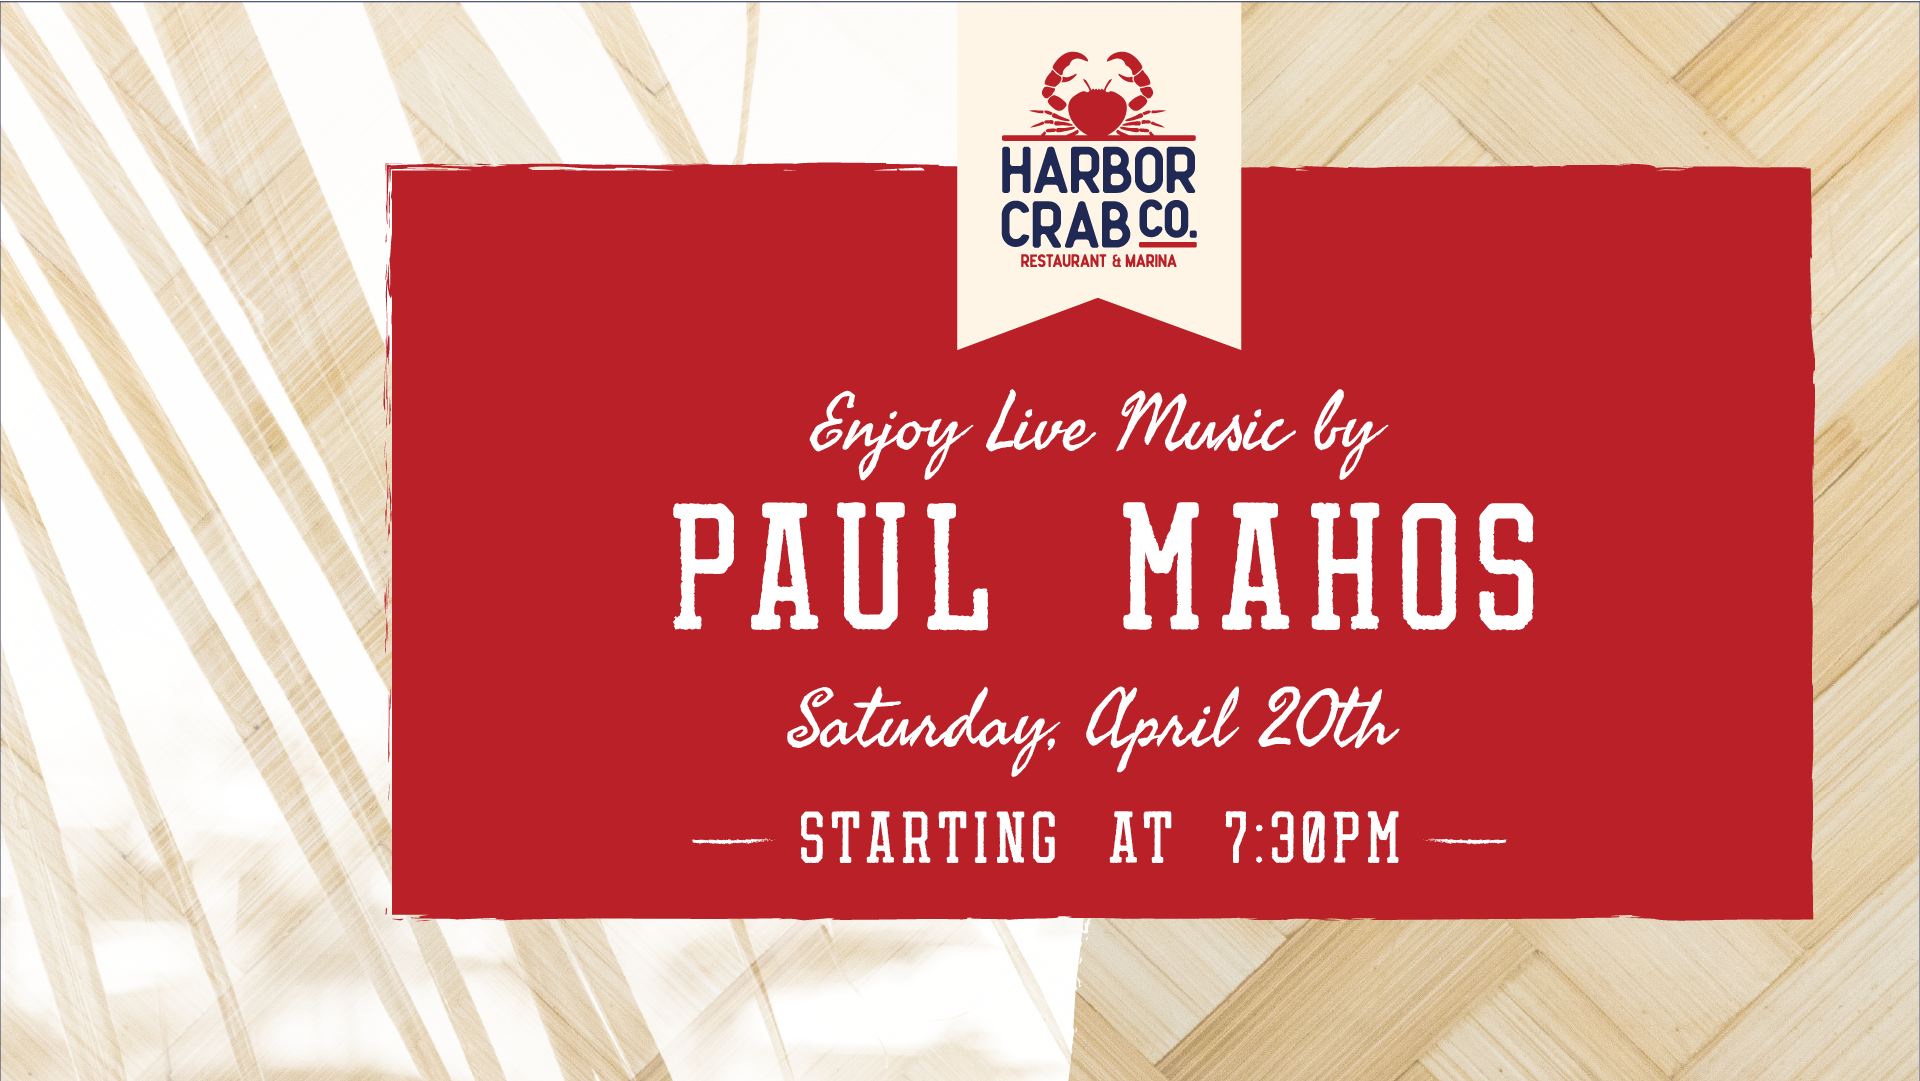 Live performance by Paul Mahos on Saturday, April 20 at 7:30PM.